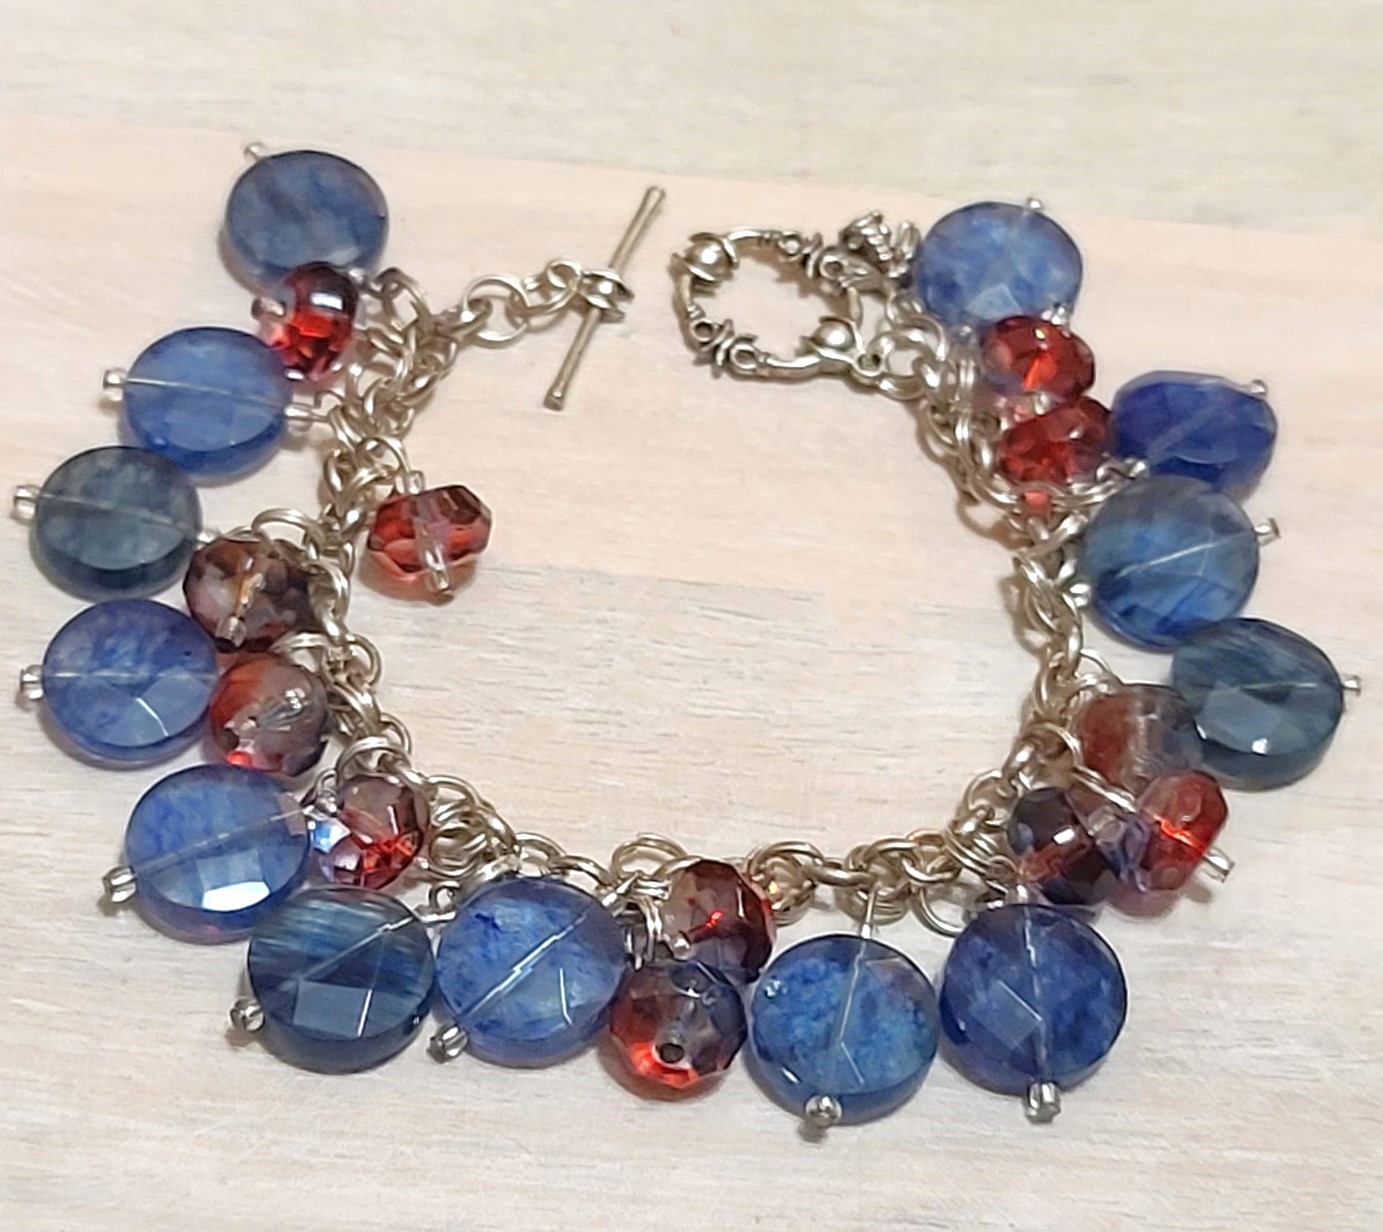 Charm bracelet, handcrafted, blue and red glass faceted beads, charms with bee silver charm